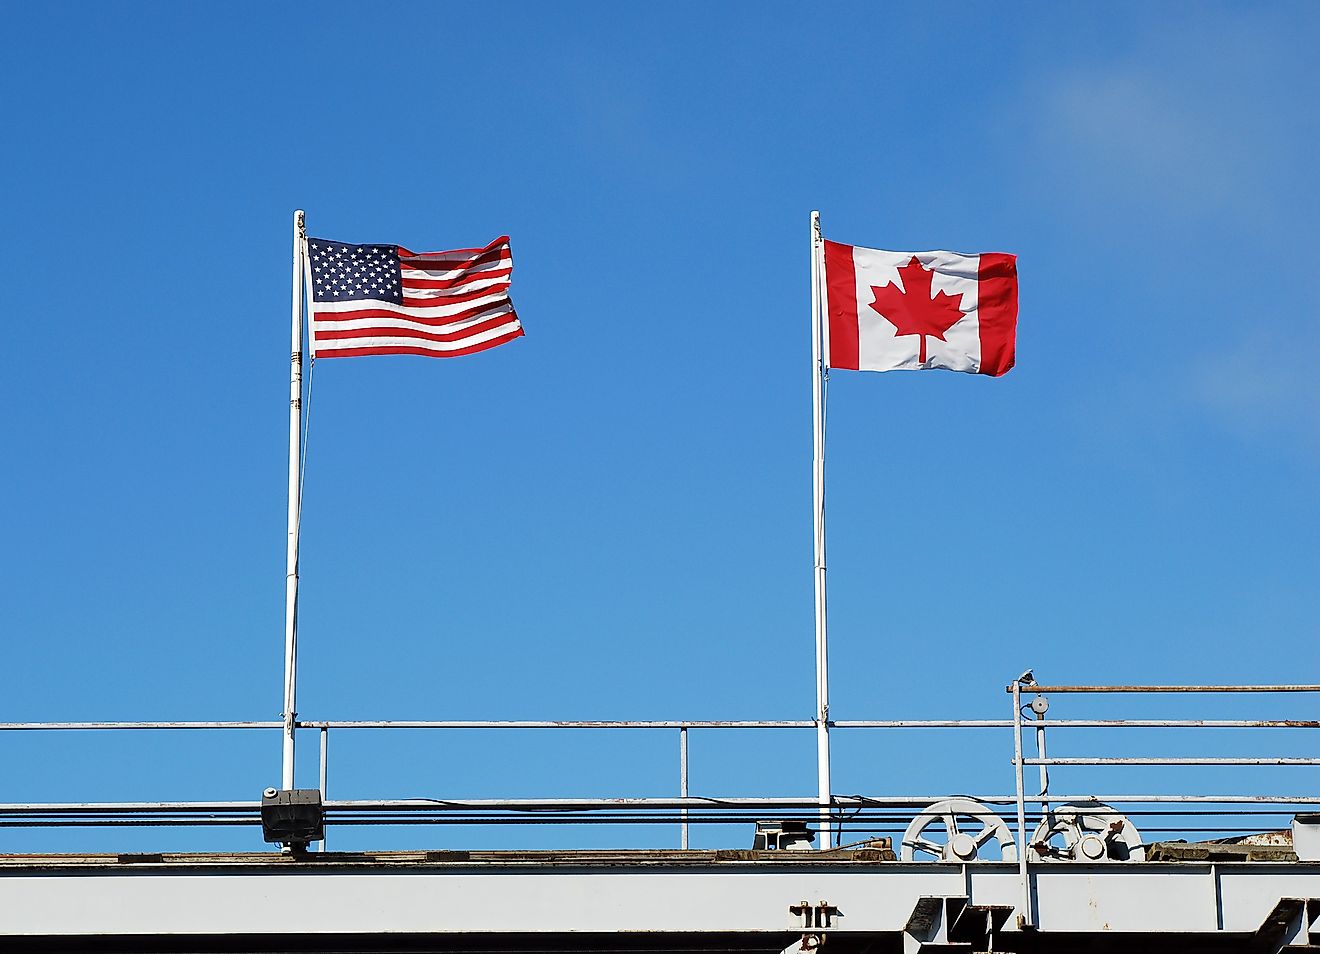 USA's and Canada's national flags fly at a US-Canada border. Image credit: Katherine Welles/Shutterstock.com